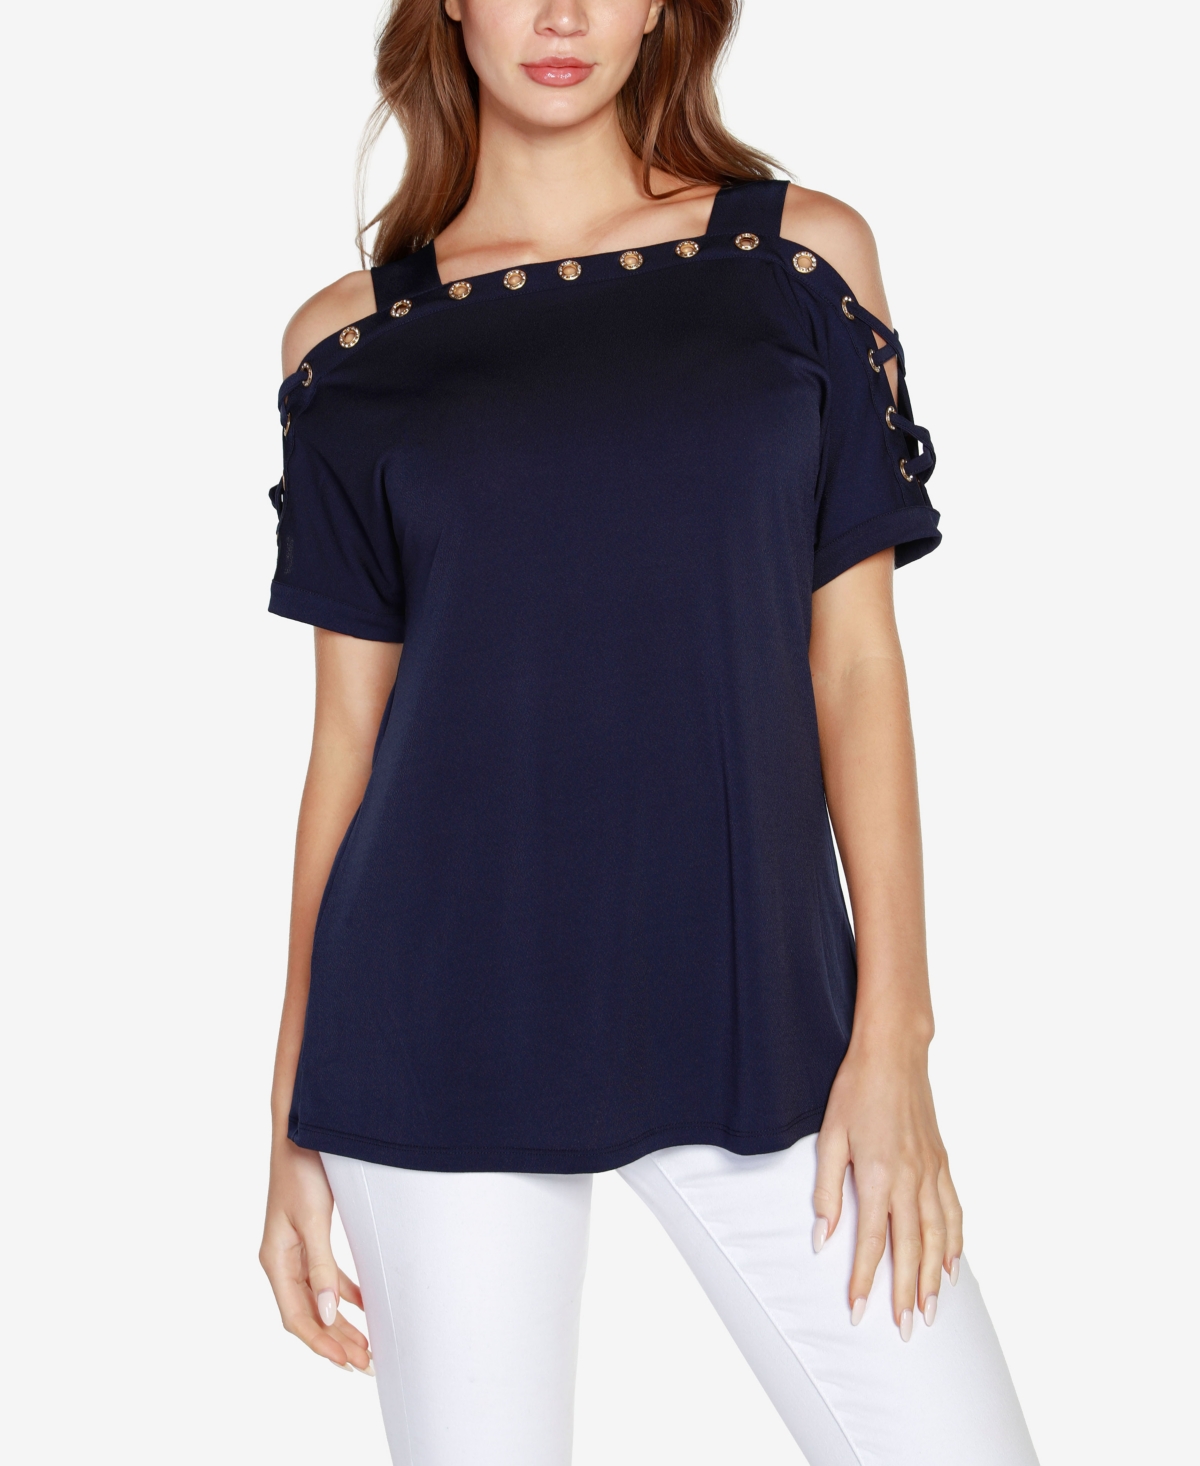 Belldini Plus Size Cold Shoulder Top In Navy